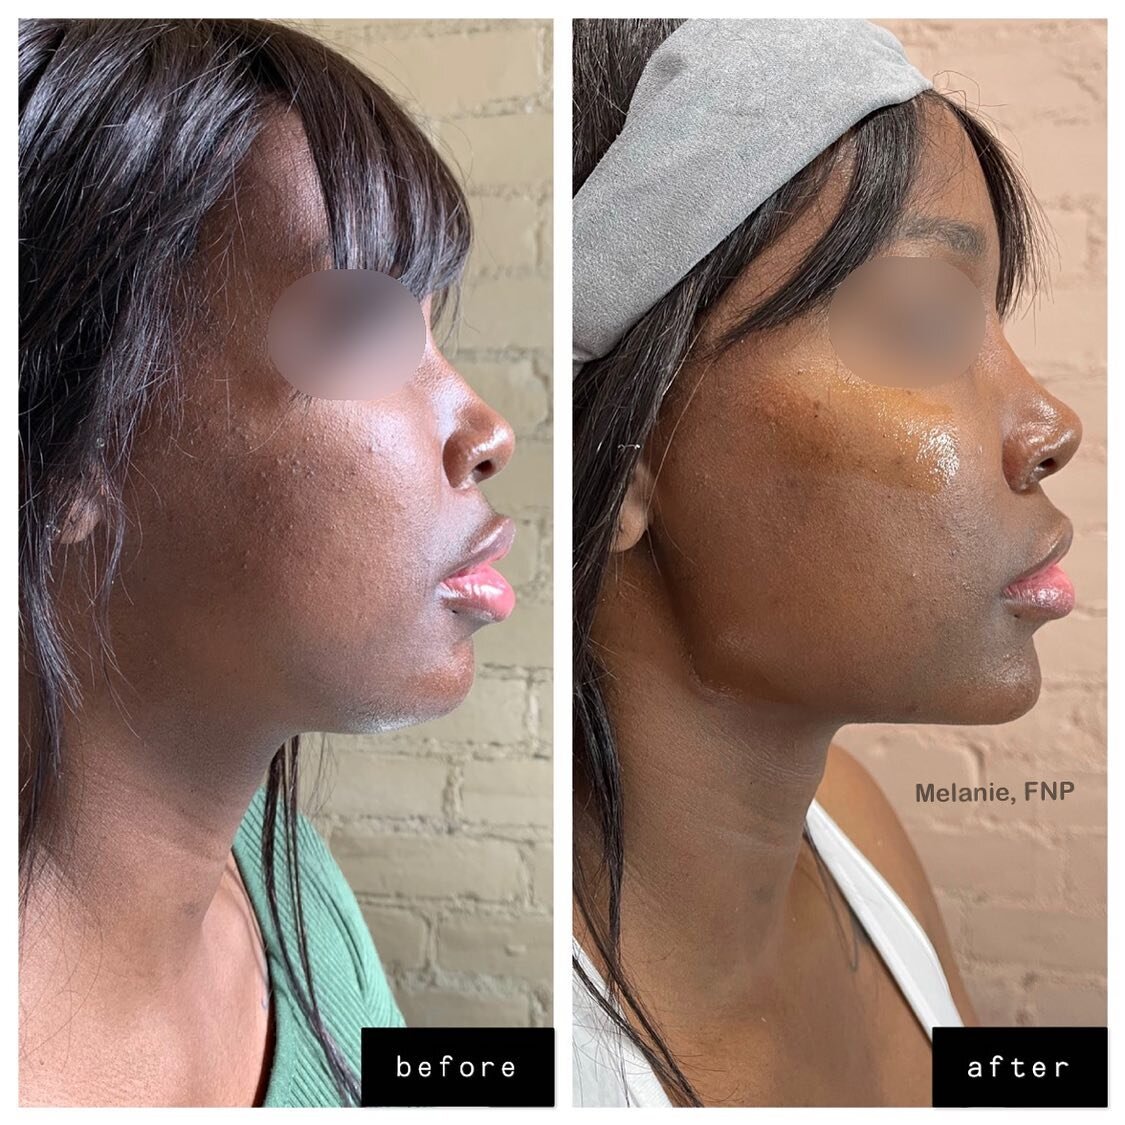 The before photo was taken January 2020
The after photo was taken February 2021

Please note: All treatments were spread out across 6 treatment dates, and not done all at once. 

Full list of treatments done:
💥Several Kybella treatments
💦Cheek Augm